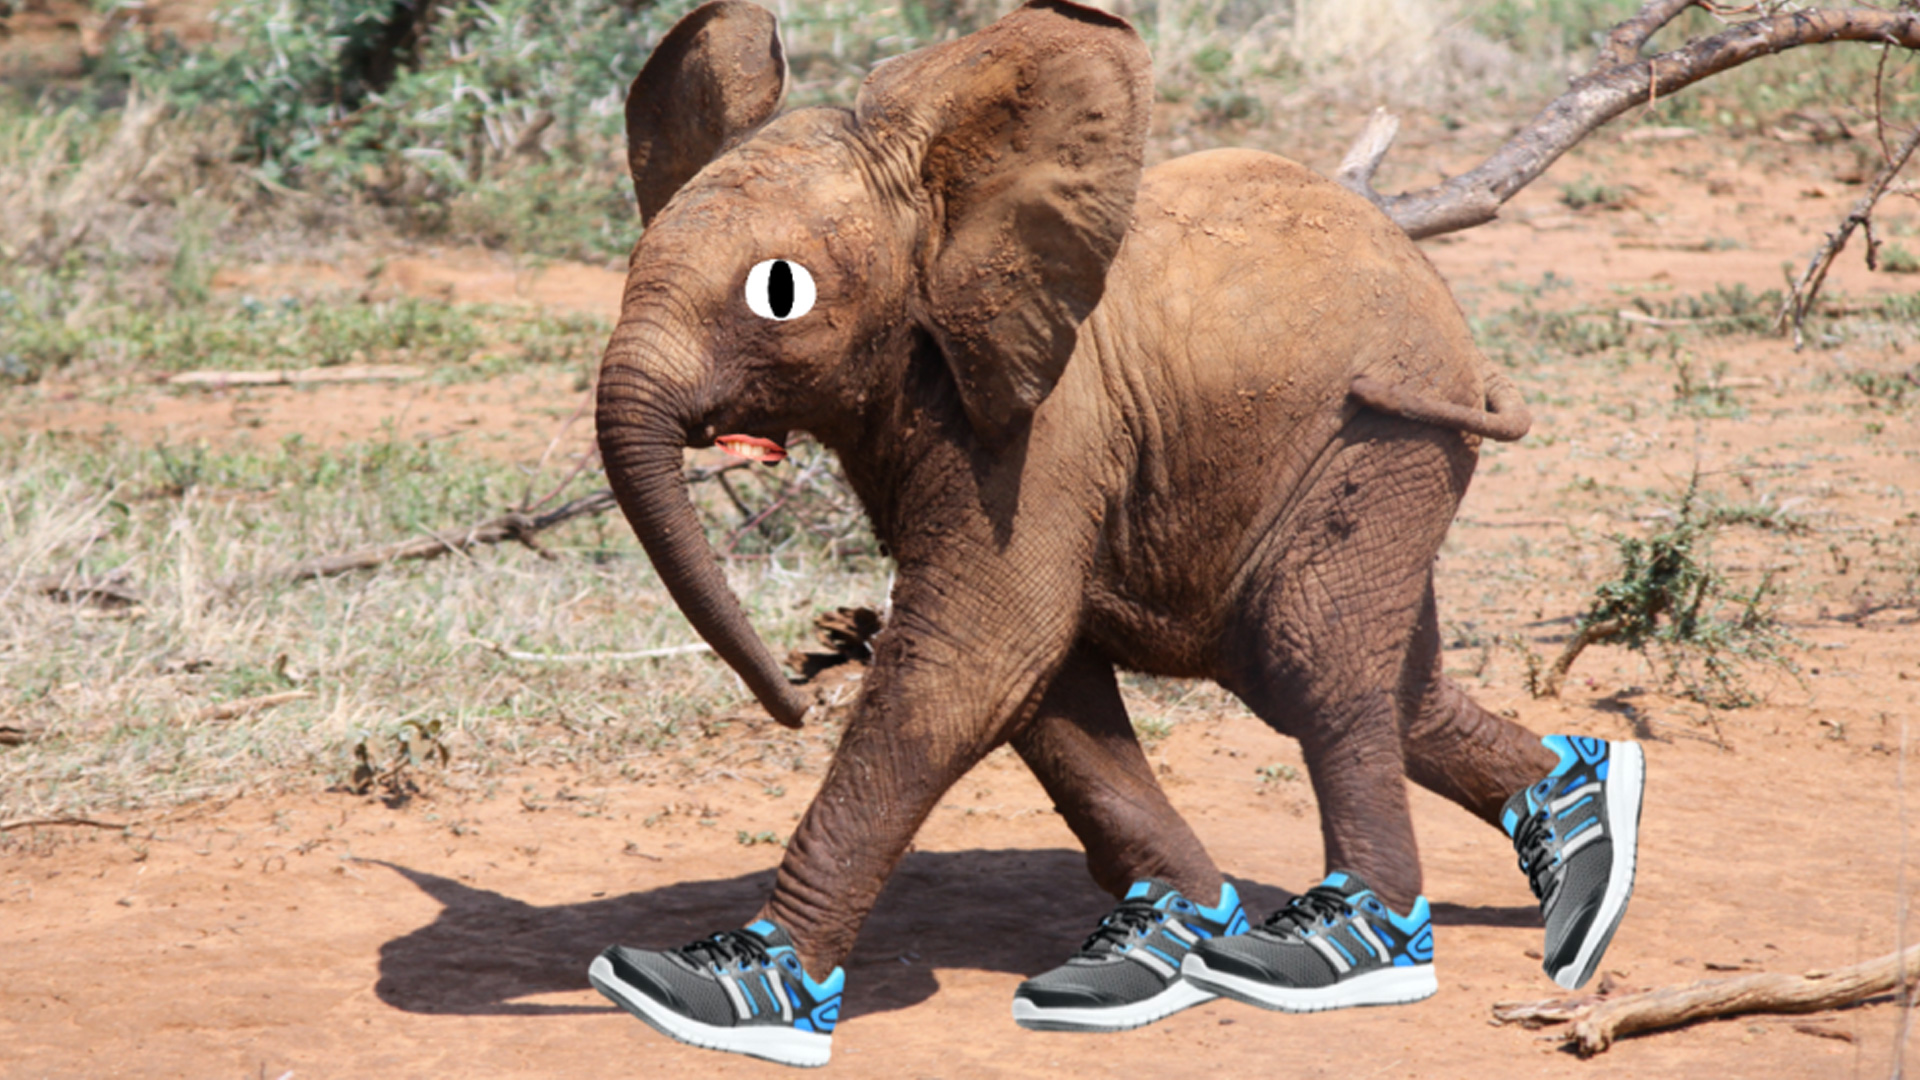 An elephant in running shoes